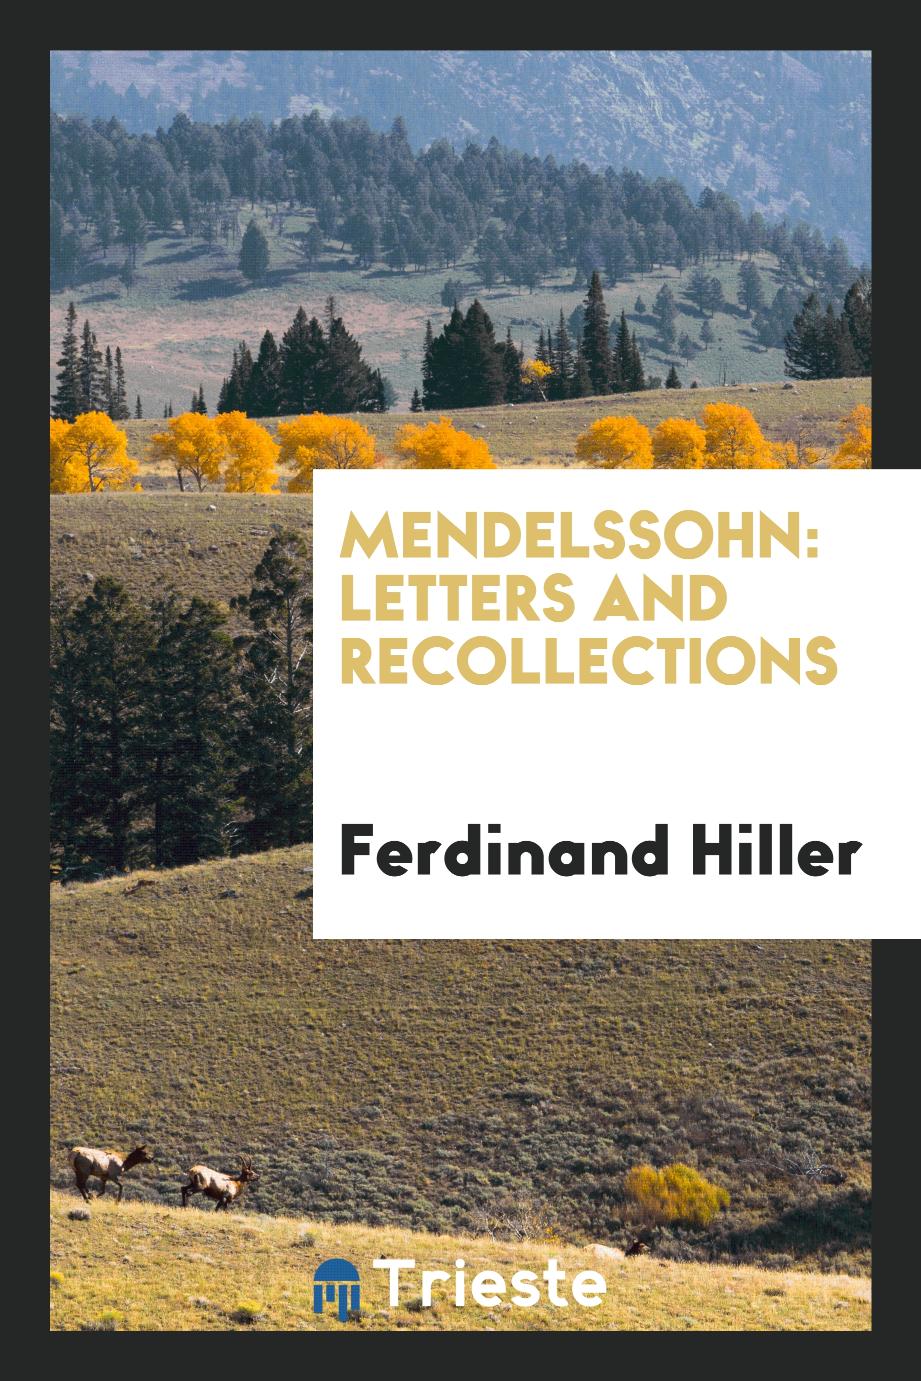 Mendelssohn: Letters and Recollections